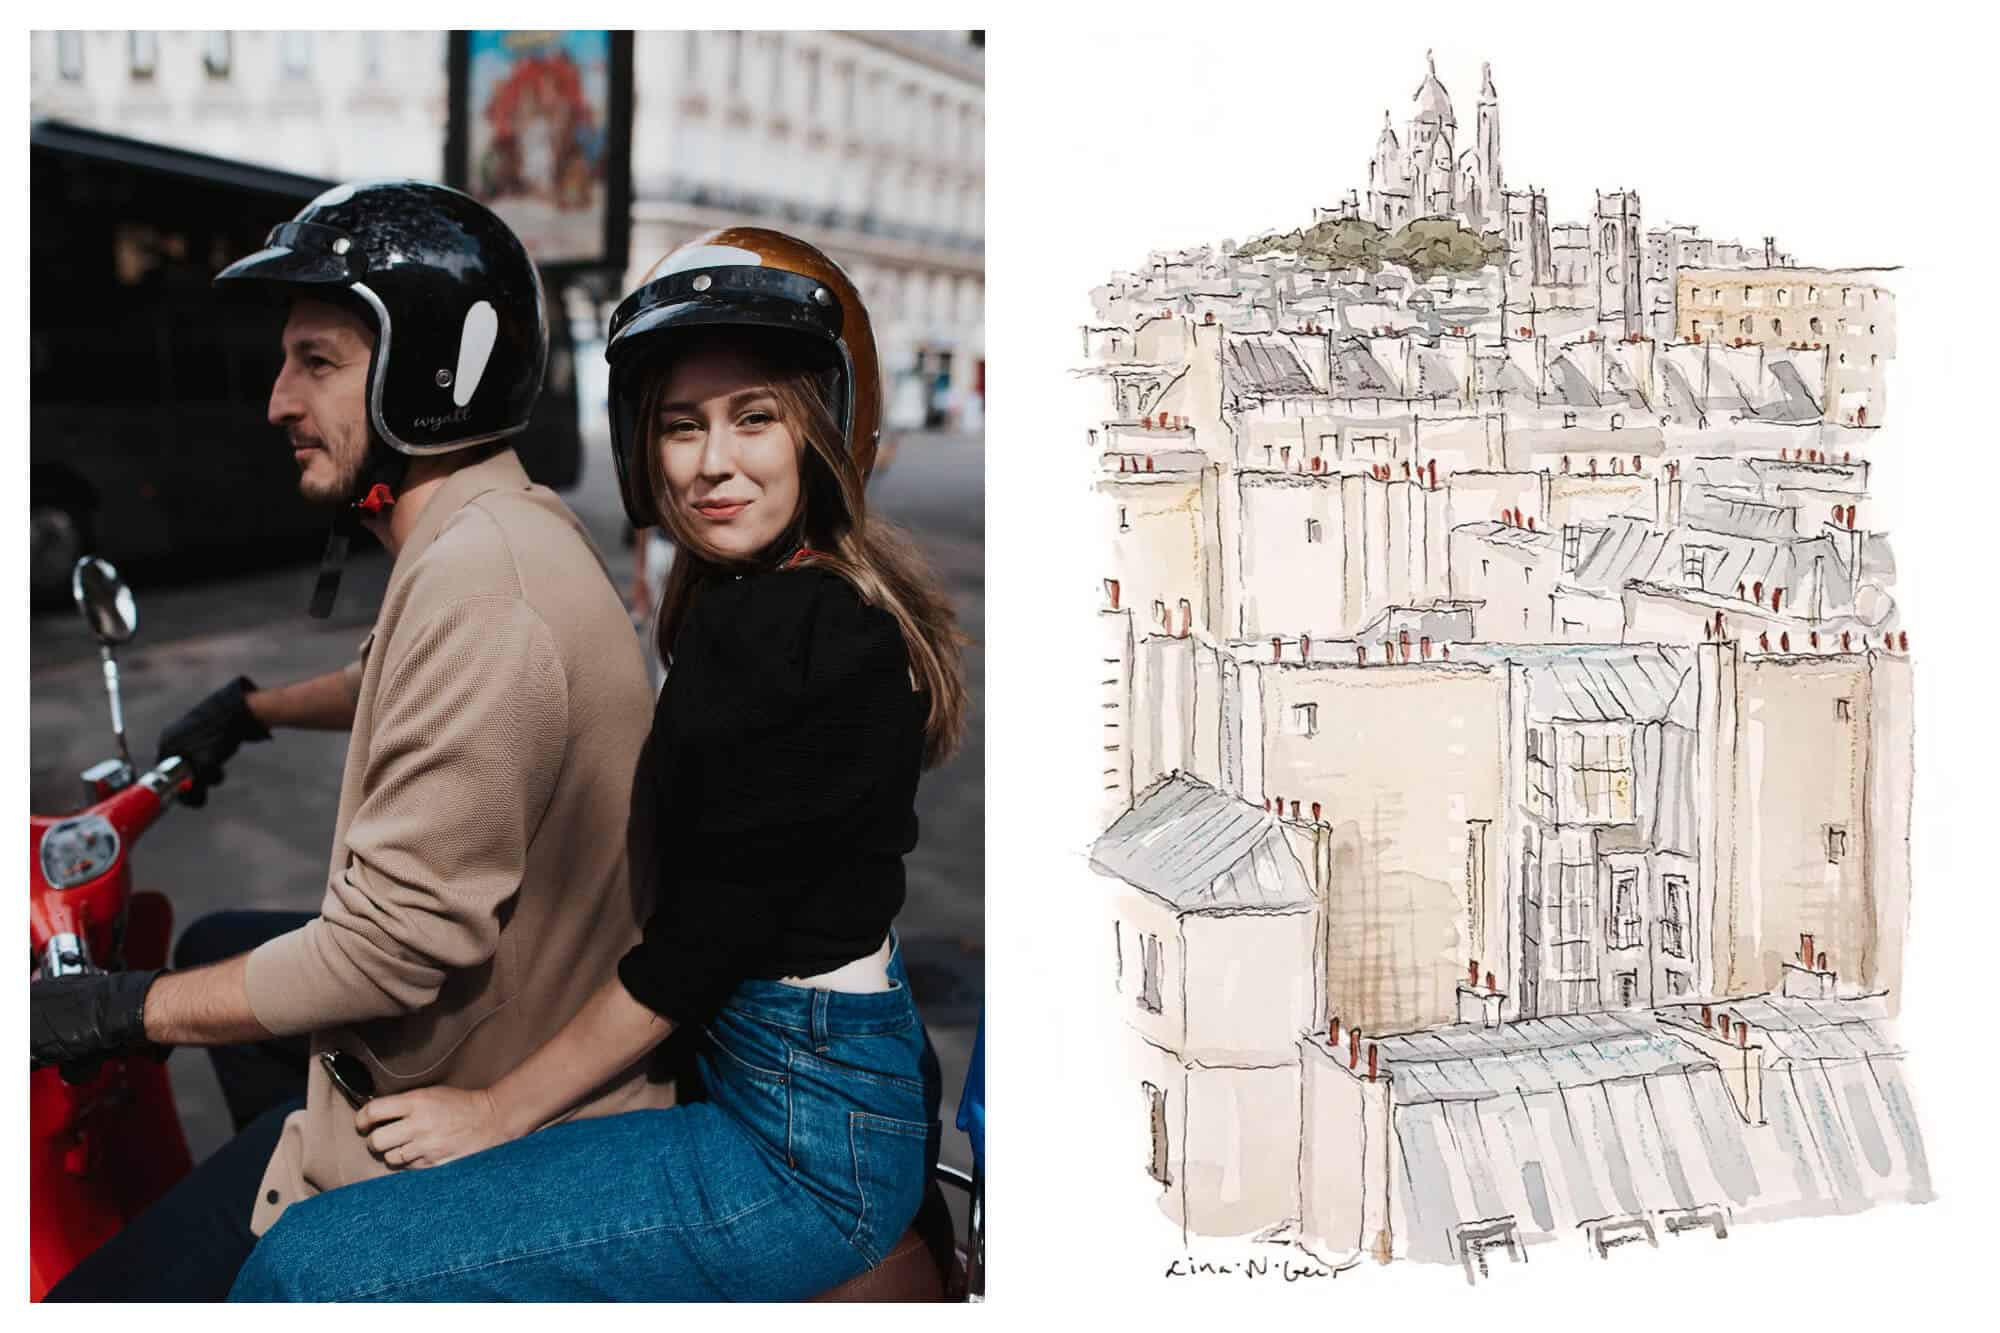 Left: A man and woman on a moped with helmets on. The woman is smiling. Right: A watercolor painting of the Sacré-Coeur church with Parisian roof tops.